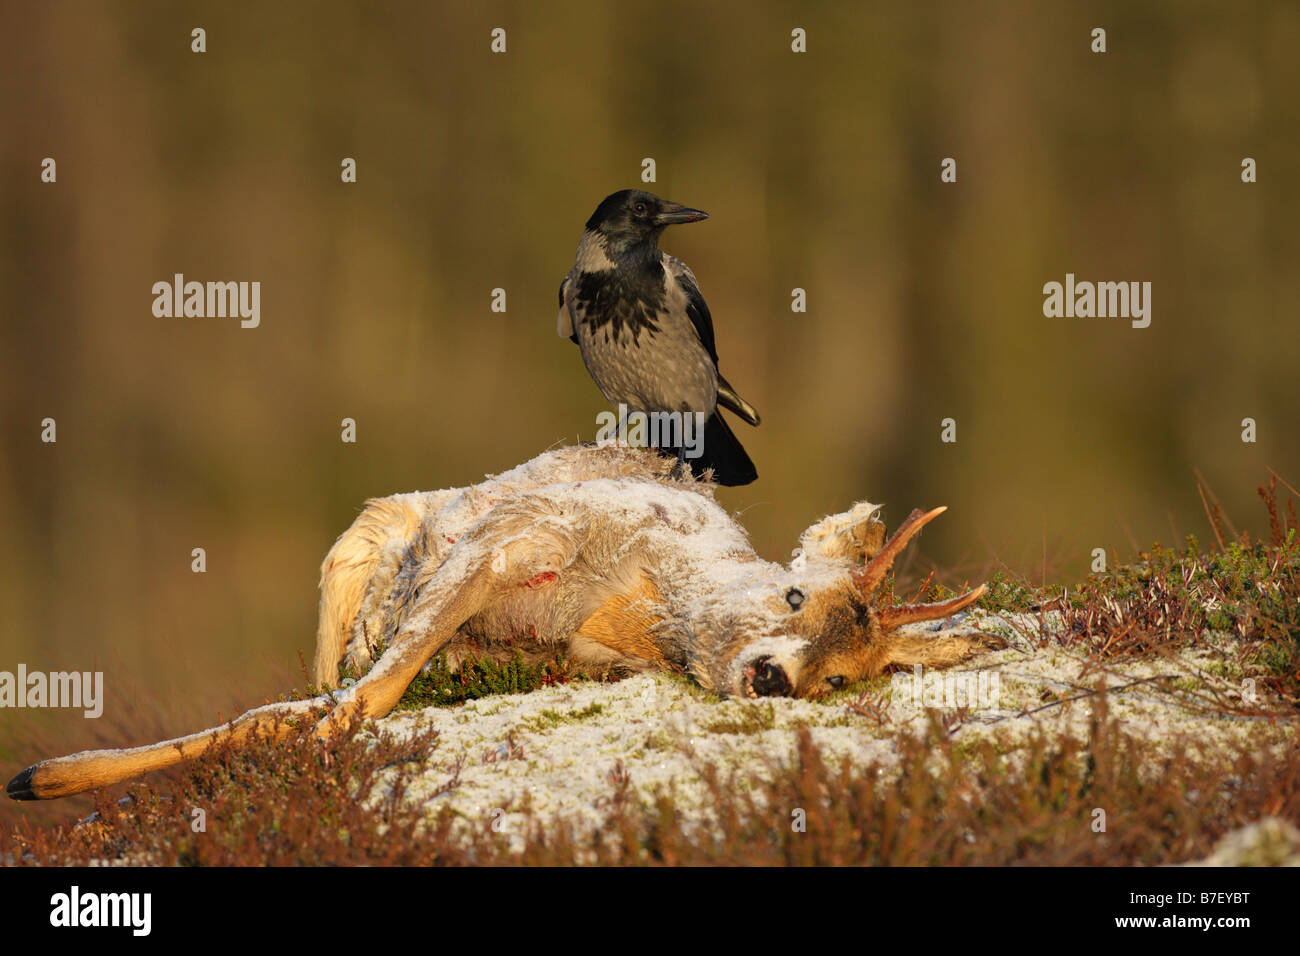 Hooded Crow Corvus corone cornix sitting on the carcass of a Roe Deer in the snow on a mountainside in norway Stock Photo